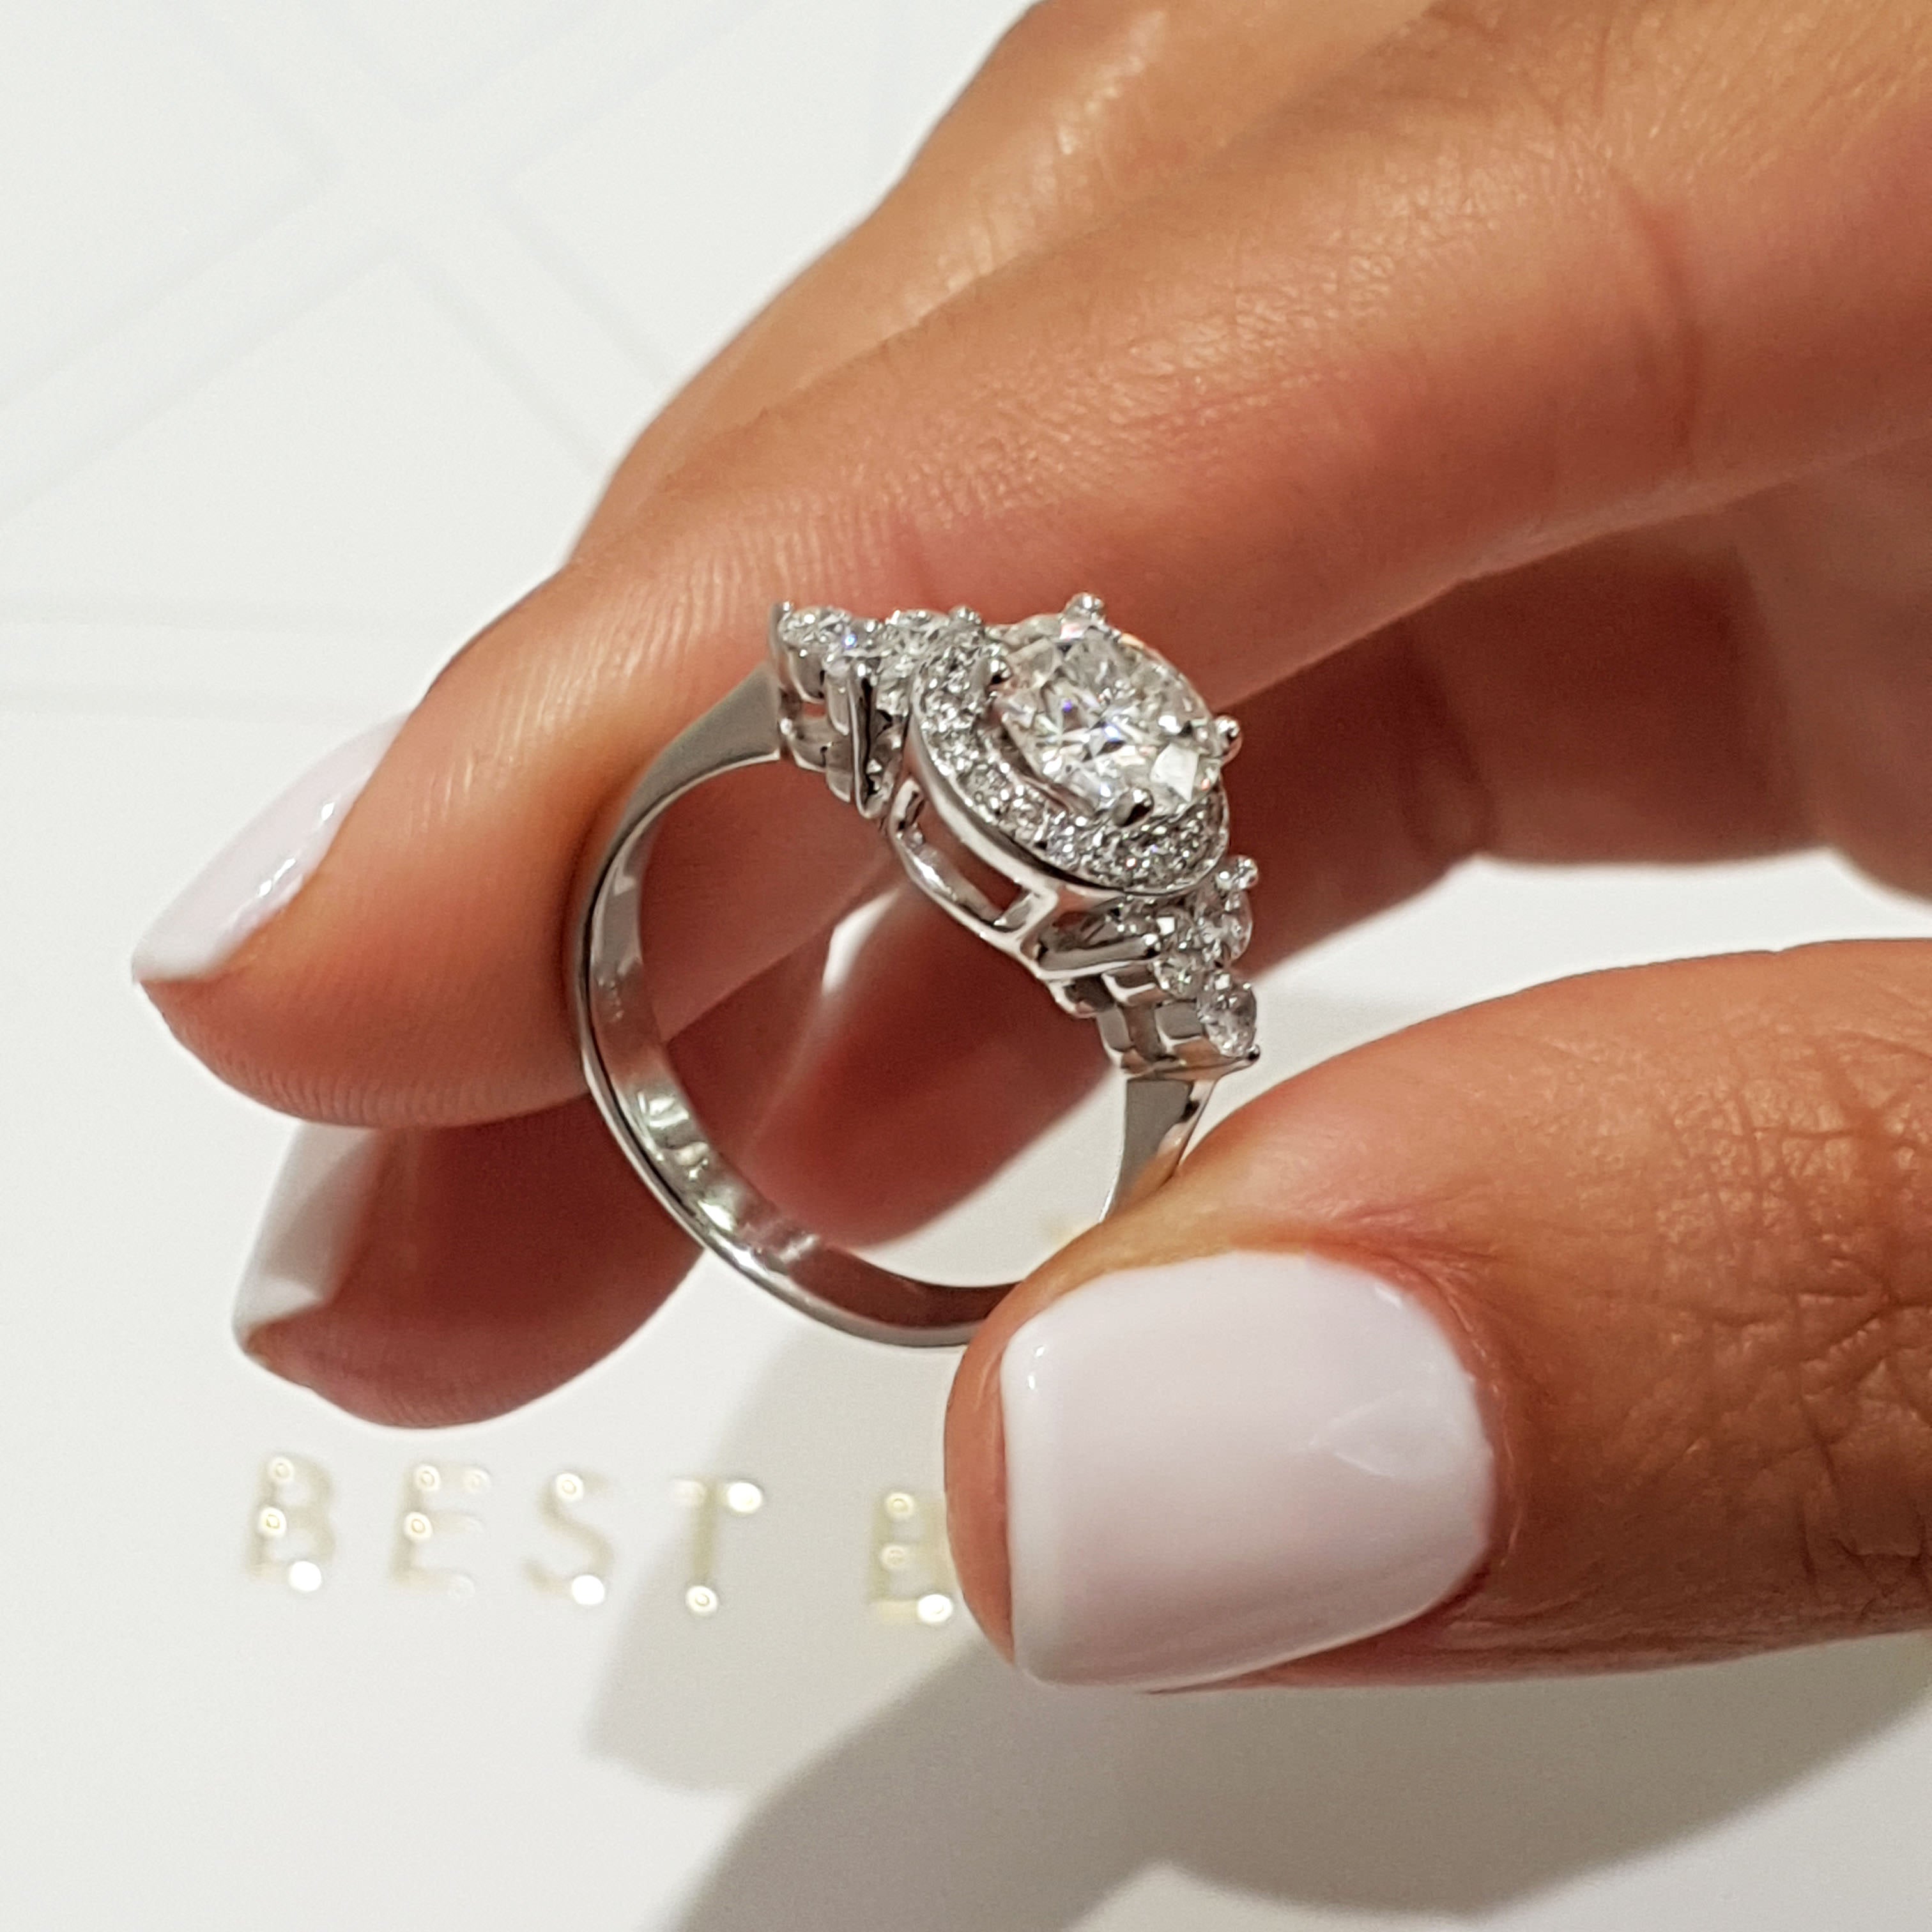 Oval Diamond Rings | How To Choose The Best One | Four Words